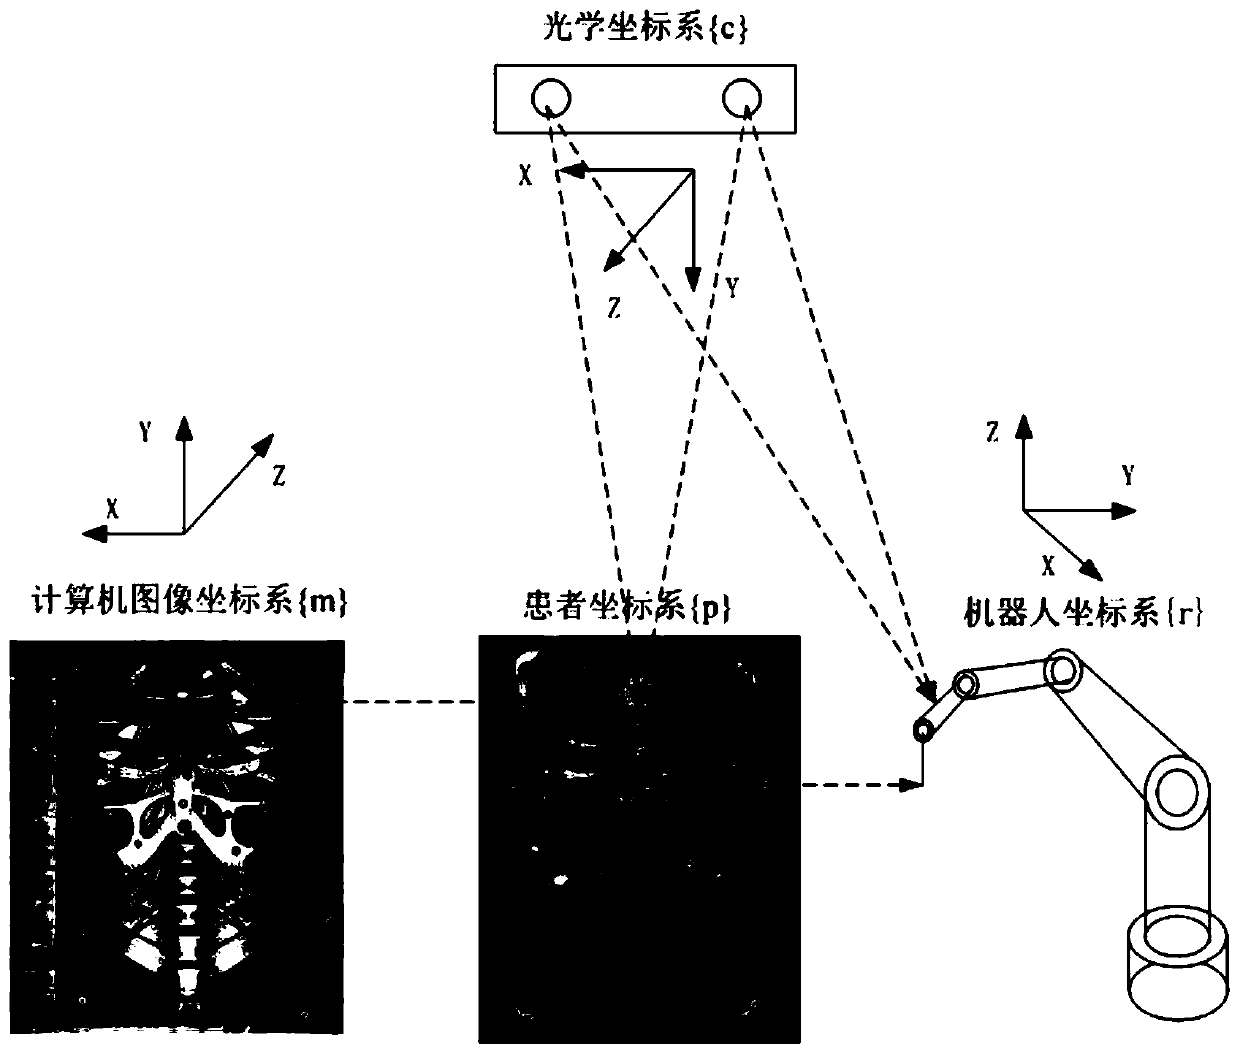 Puncture robot navigation system with dynamic compensation function based on binocular vision